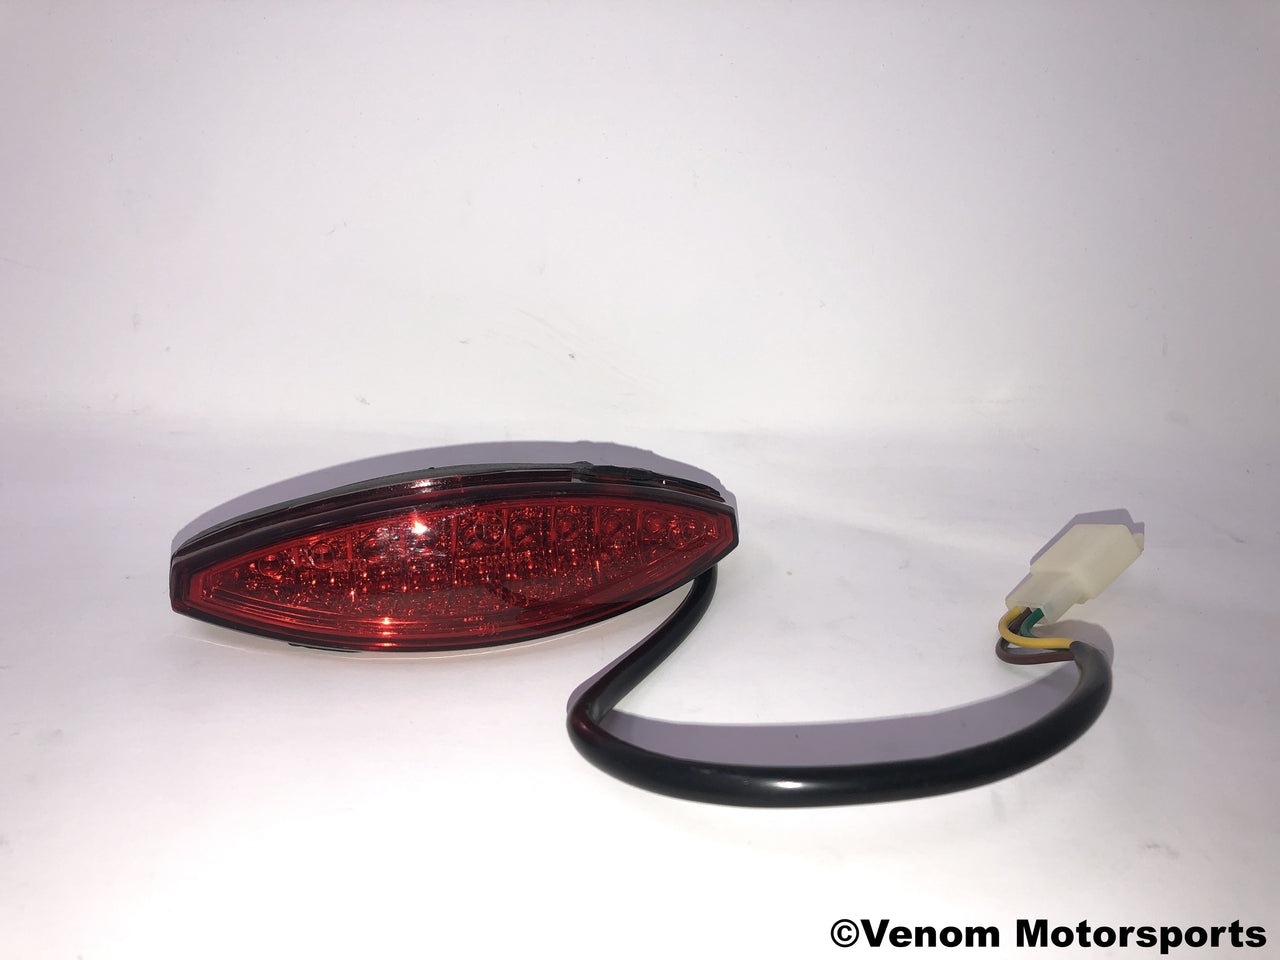 X18 50cc GY6 Motorcycle | Tail Light (09030050)